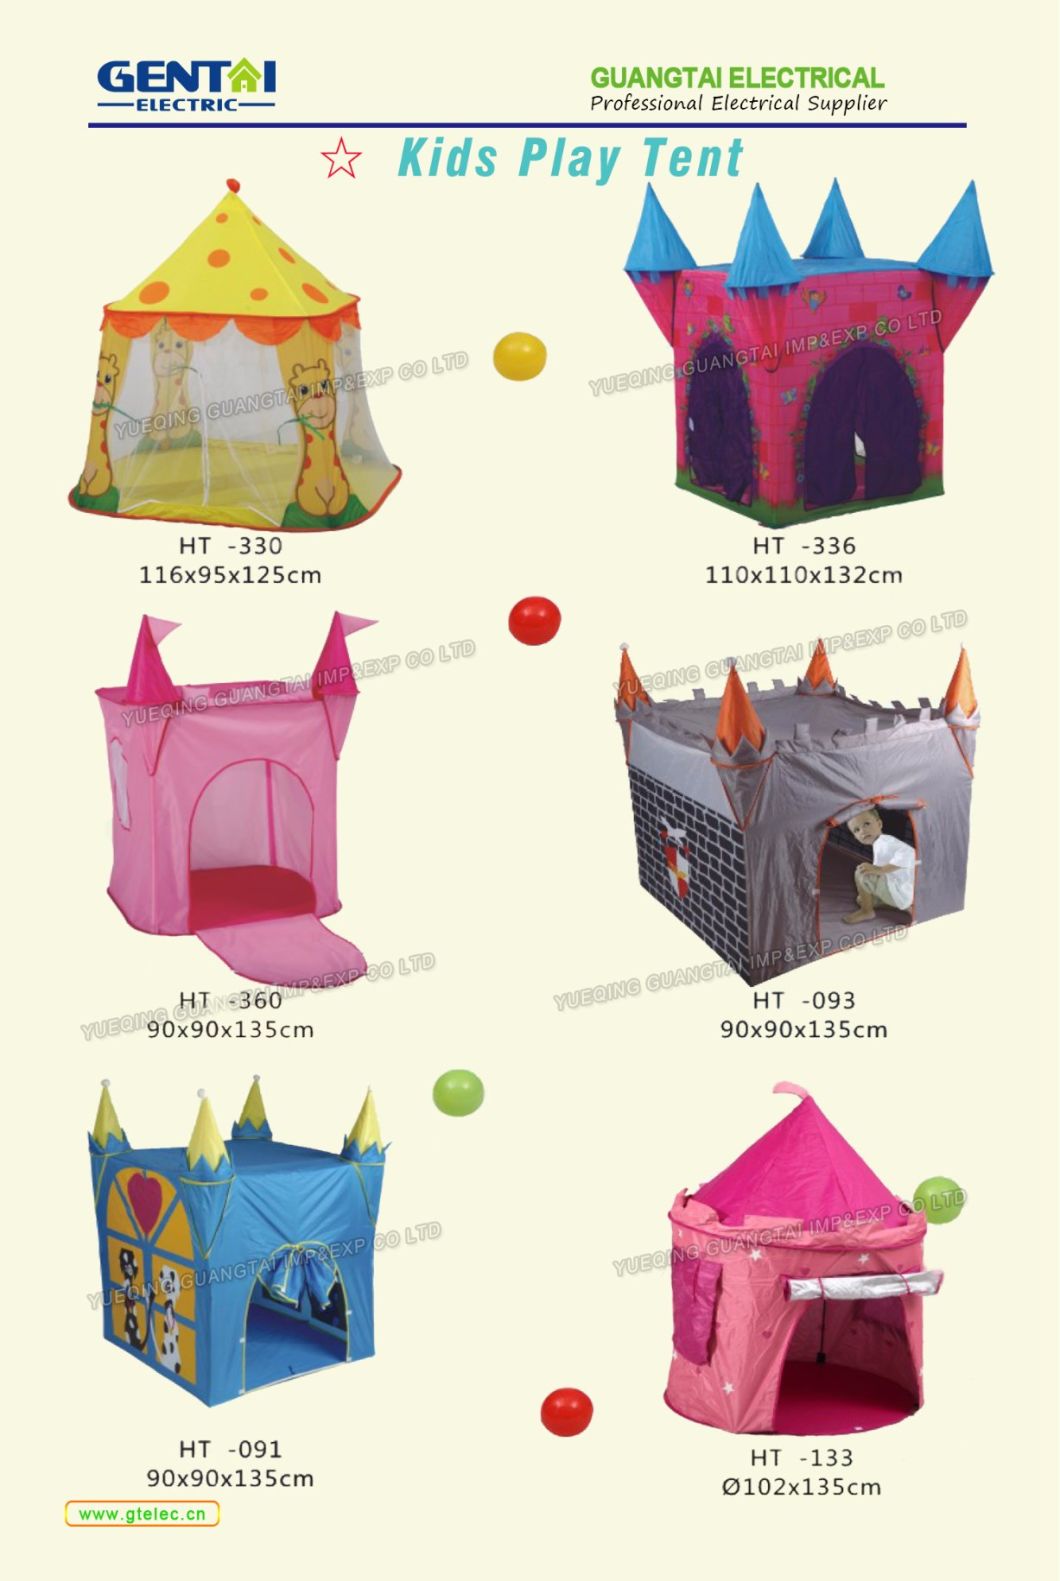 Hot Selling Kids Play Tent with Low Price